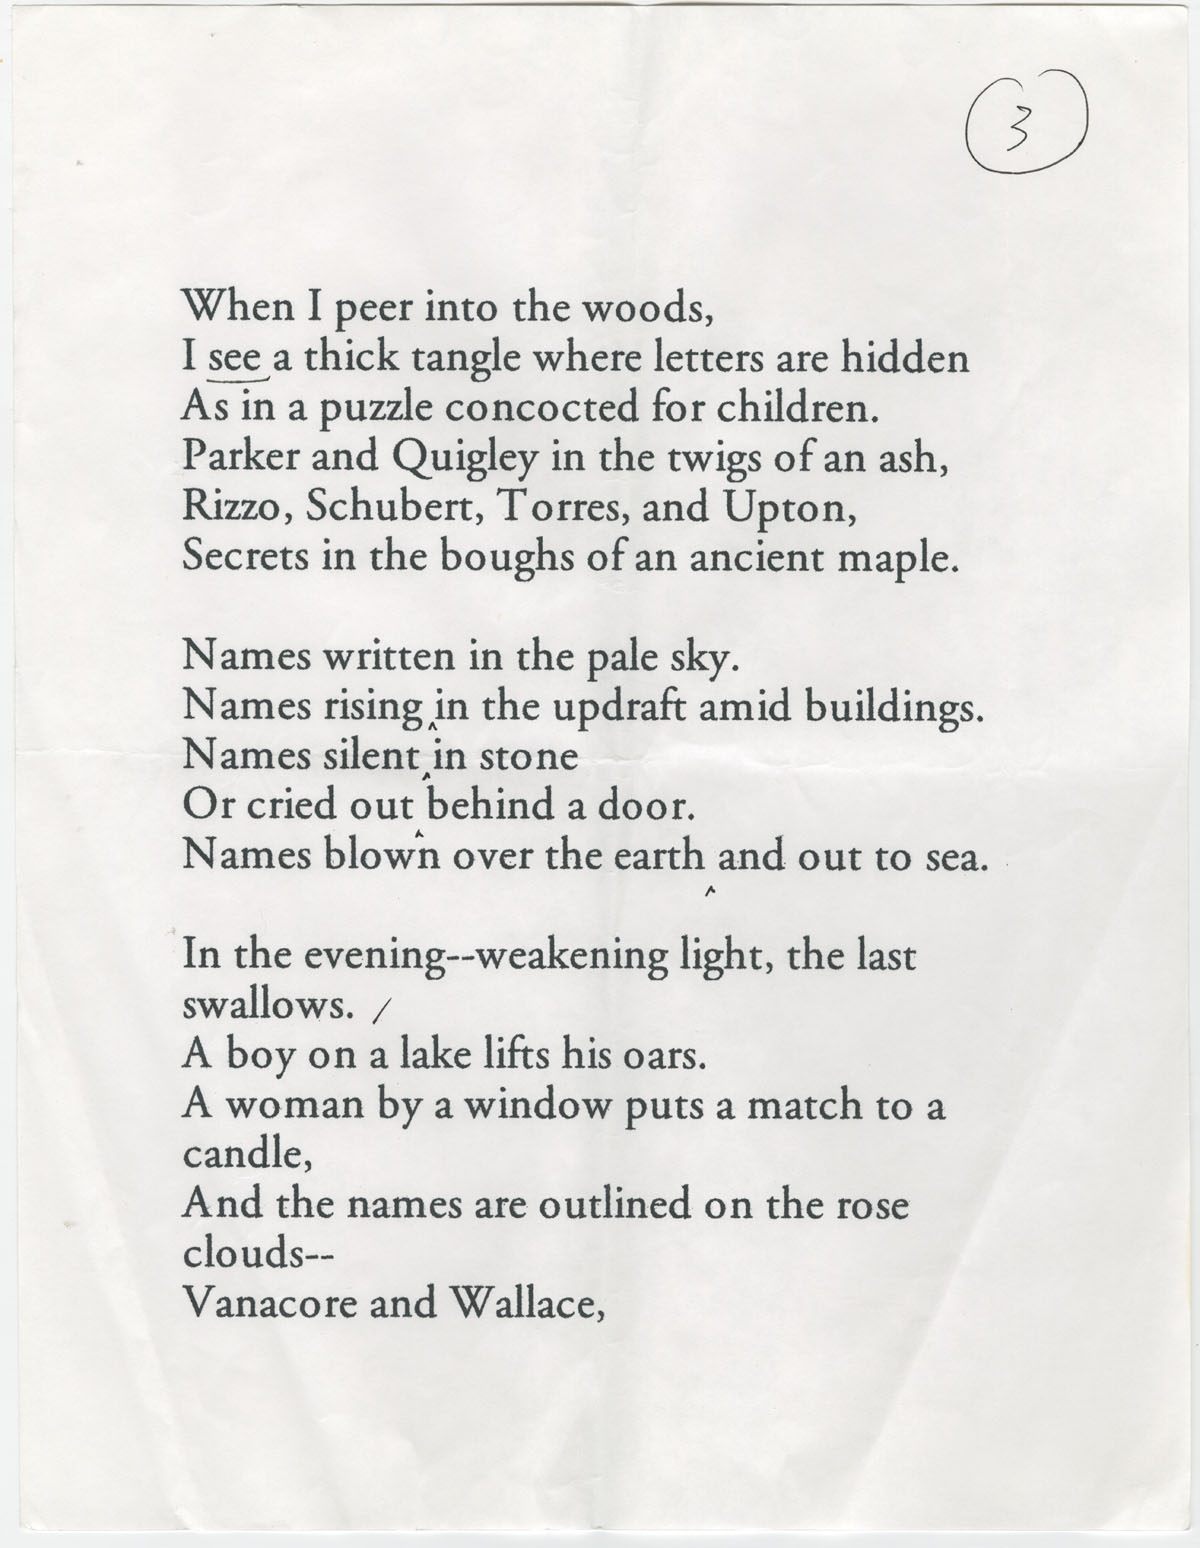 Notebooks illuminate creative process behind Billy Collins s poem “The Names”